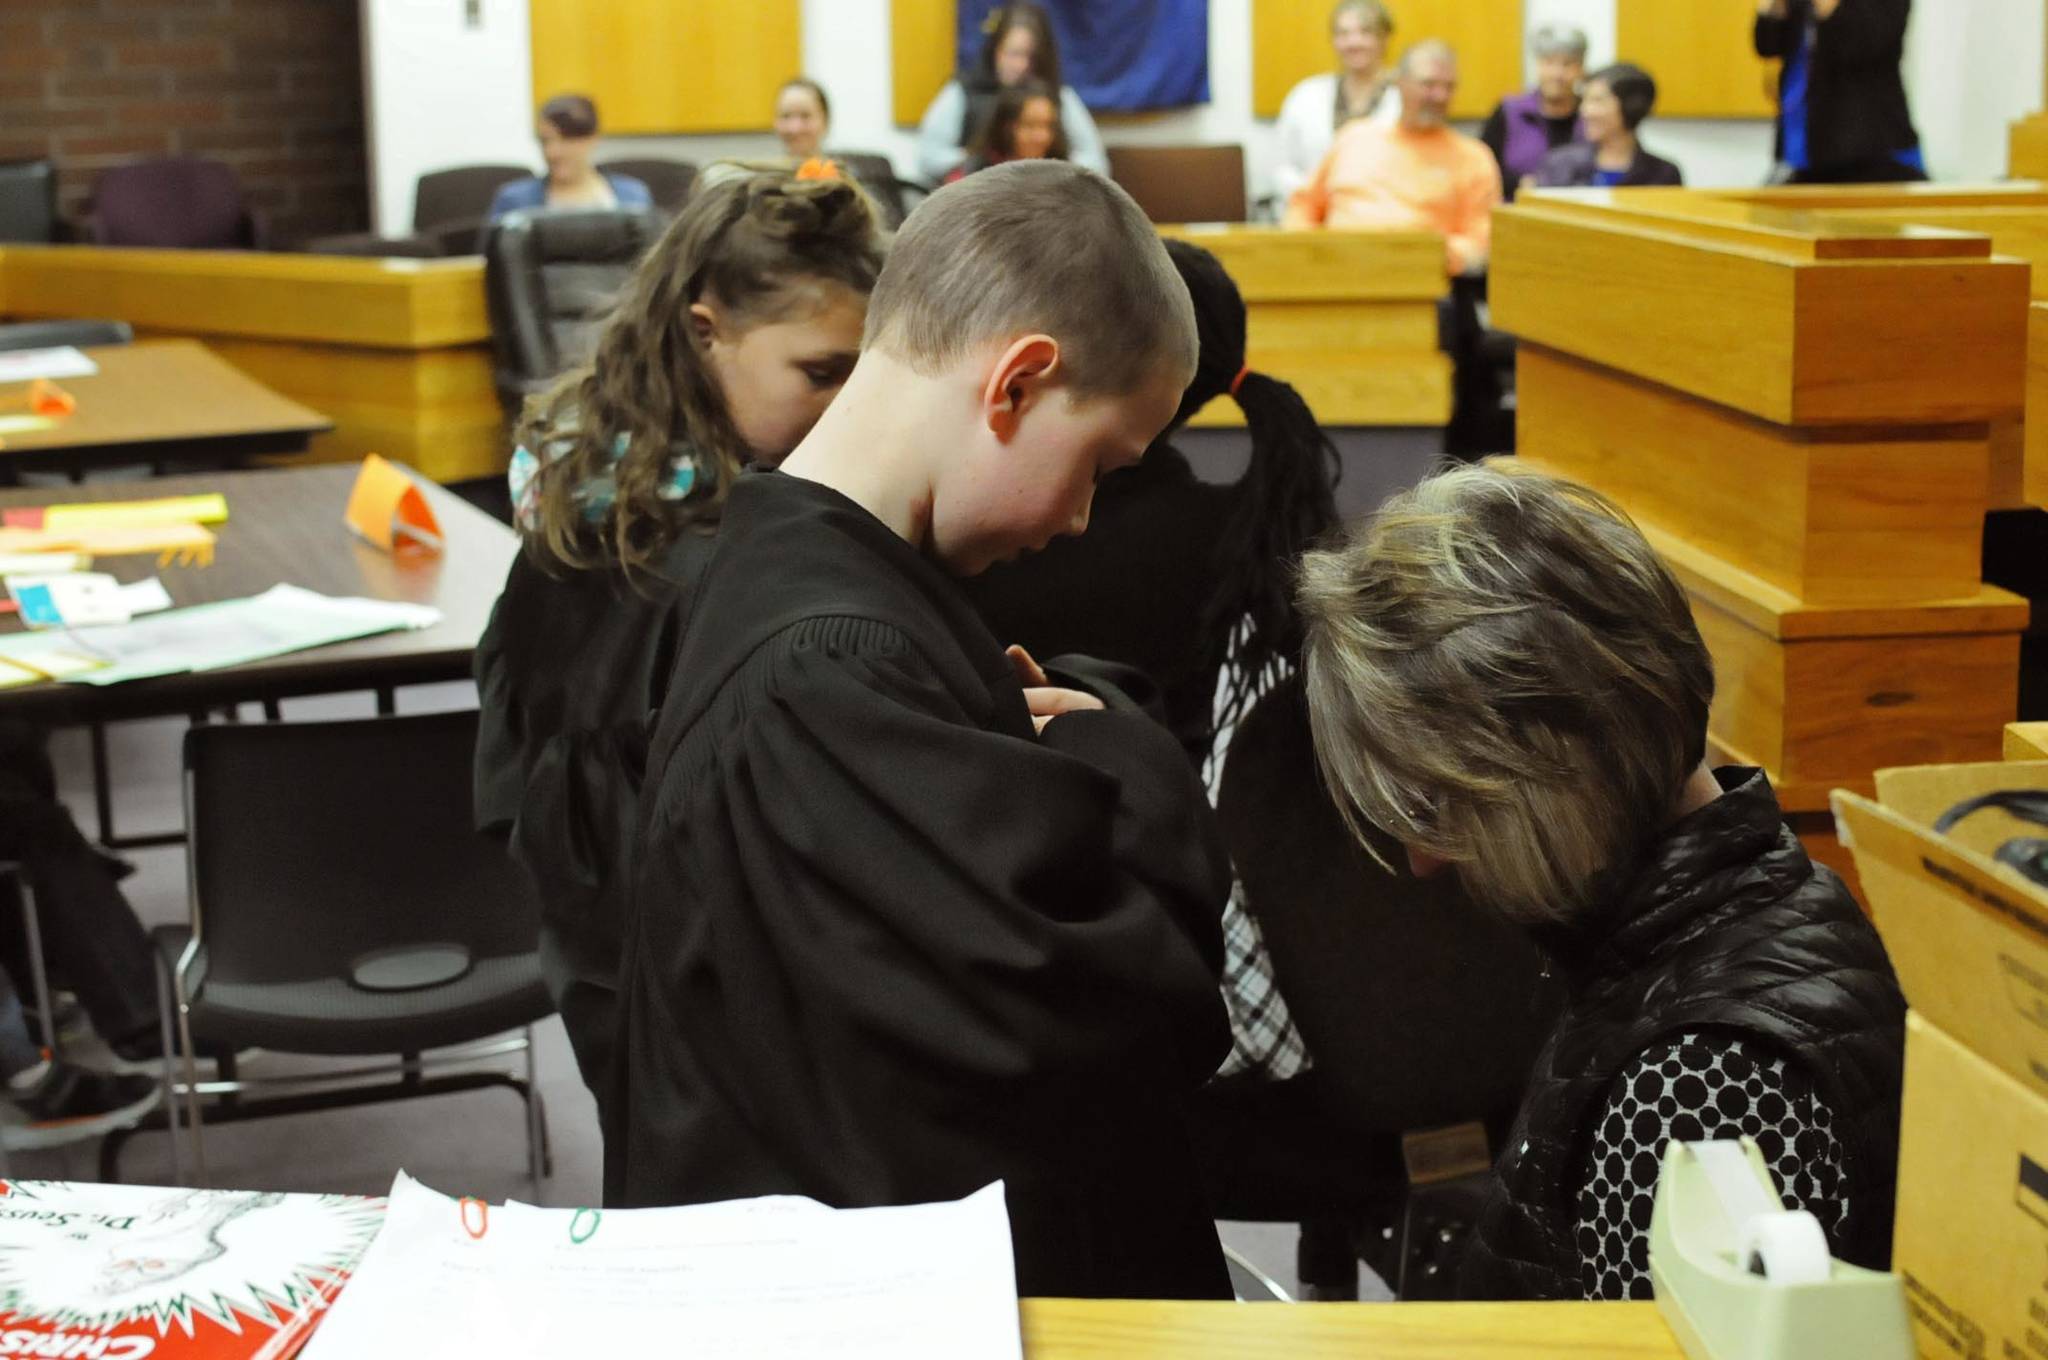 Kalifornsky Beach Elementary School 2nd grade teacher Kelly Brewer helps student Levi Kirby into his judge’s robes before the class begins its mock trial of “Arthur T. Grinch” based on the Dr. Seuss classic “How the Grinch Stole Christmas” on Thursday, Nov. 9, 2017 in Kenai, Alaska. The class has been studying civics and learning about the court process and put on a mock sentencing hearing, complete with witnesses and a jury composed of students’ parents and K-Beach Elementary Principal Nate Crabtree. (Photo by Elizabeth Earl/Peninsula Clarion)